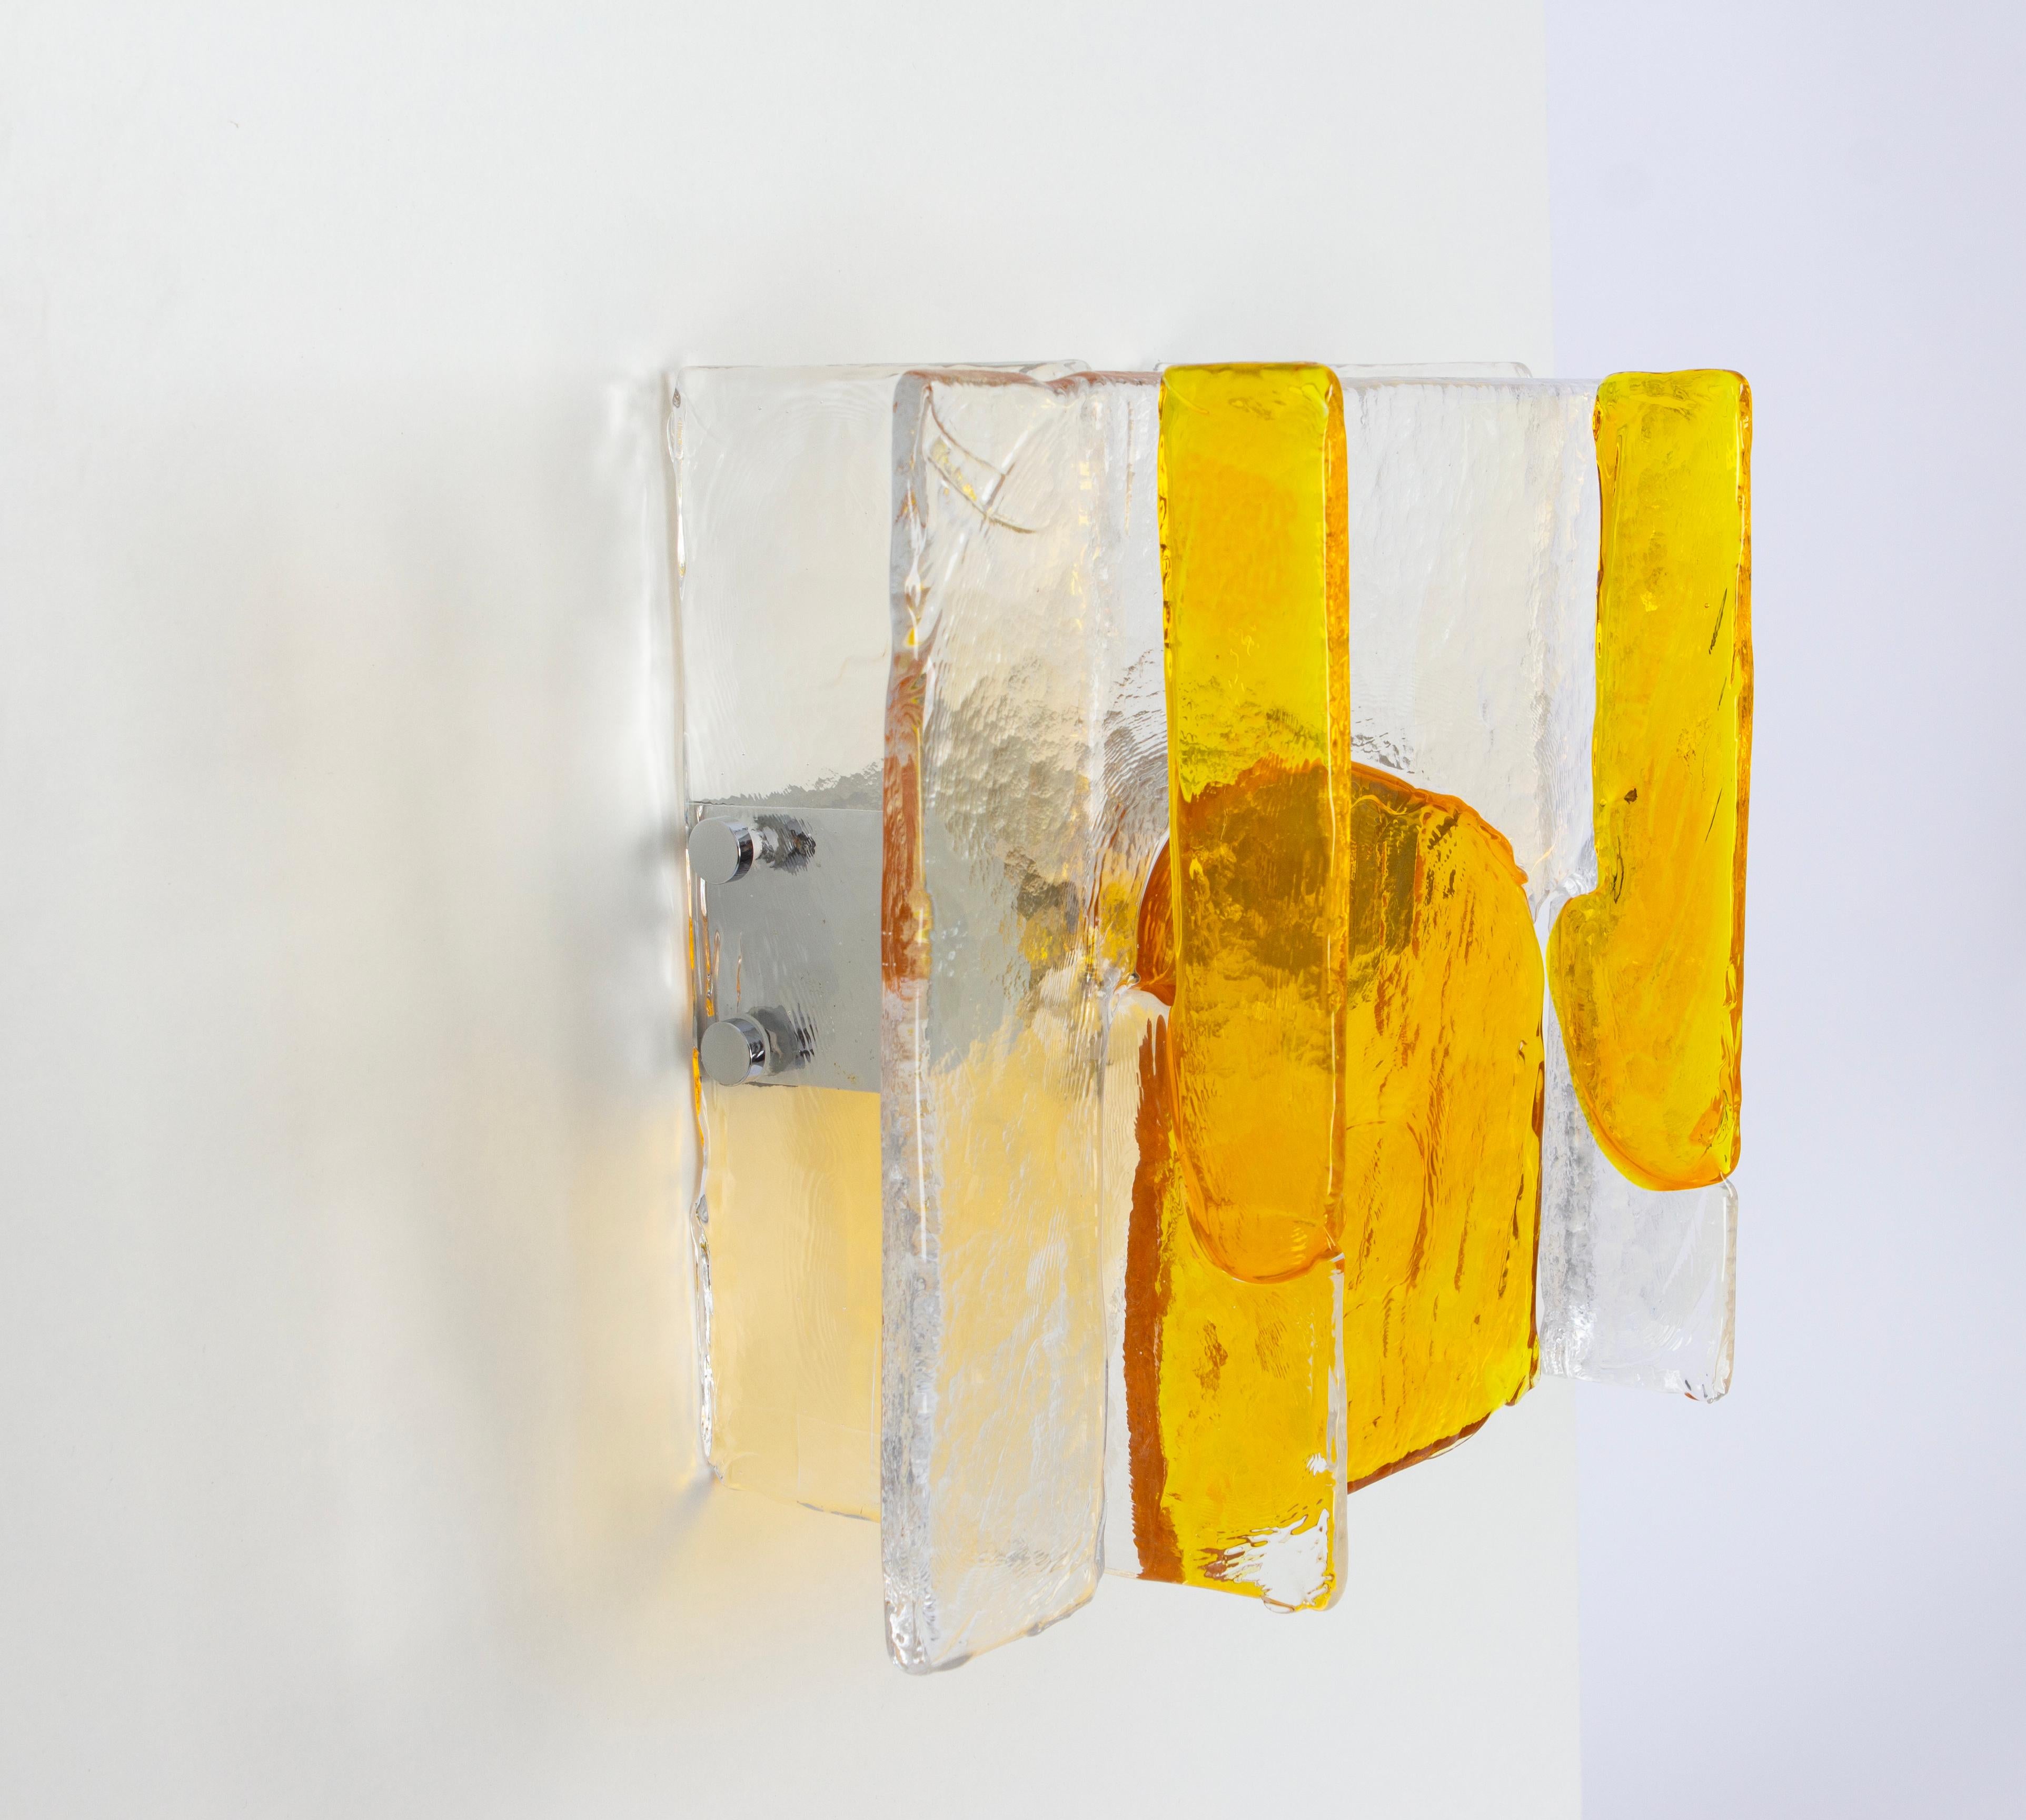 Austrian Set of 2 Murano Glass Sconces Wall Lights by Mazzega, Italy, circa 1970s For Sale